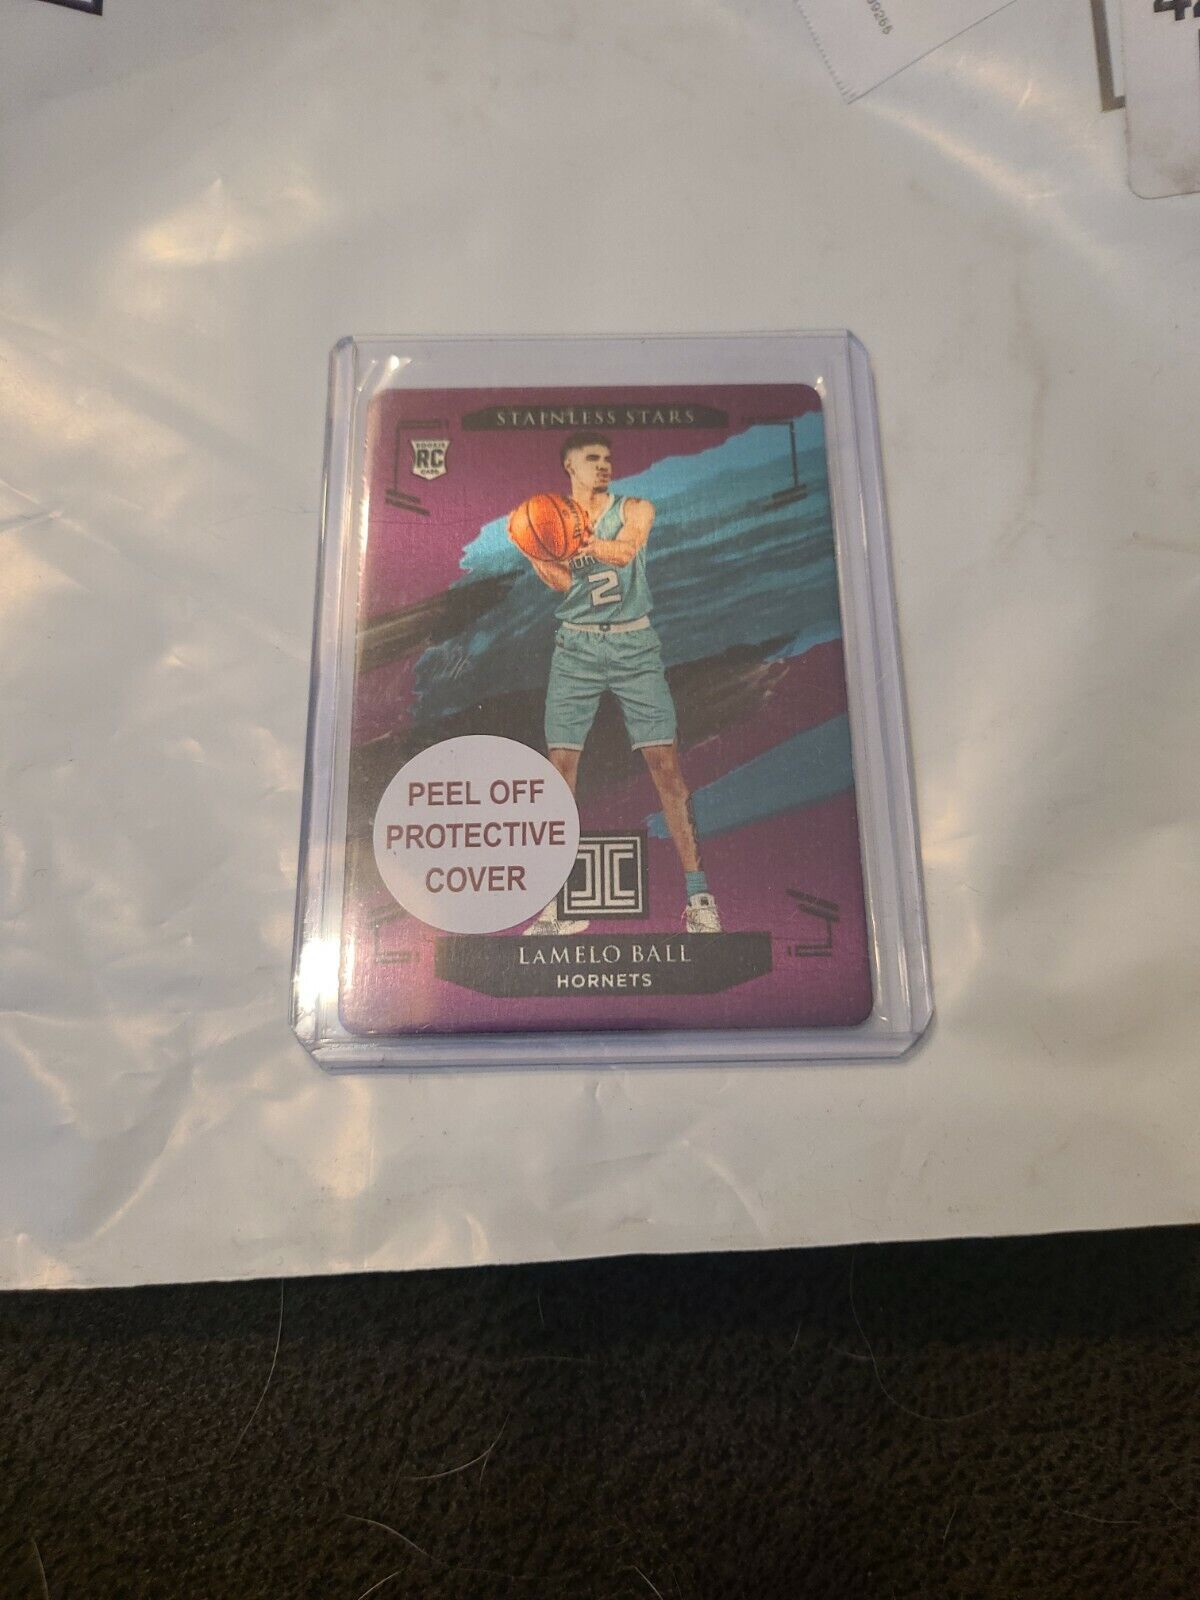 LaMELO BALL Impeccable Stainless 2/49 Purple RC Rookie JERSEY #